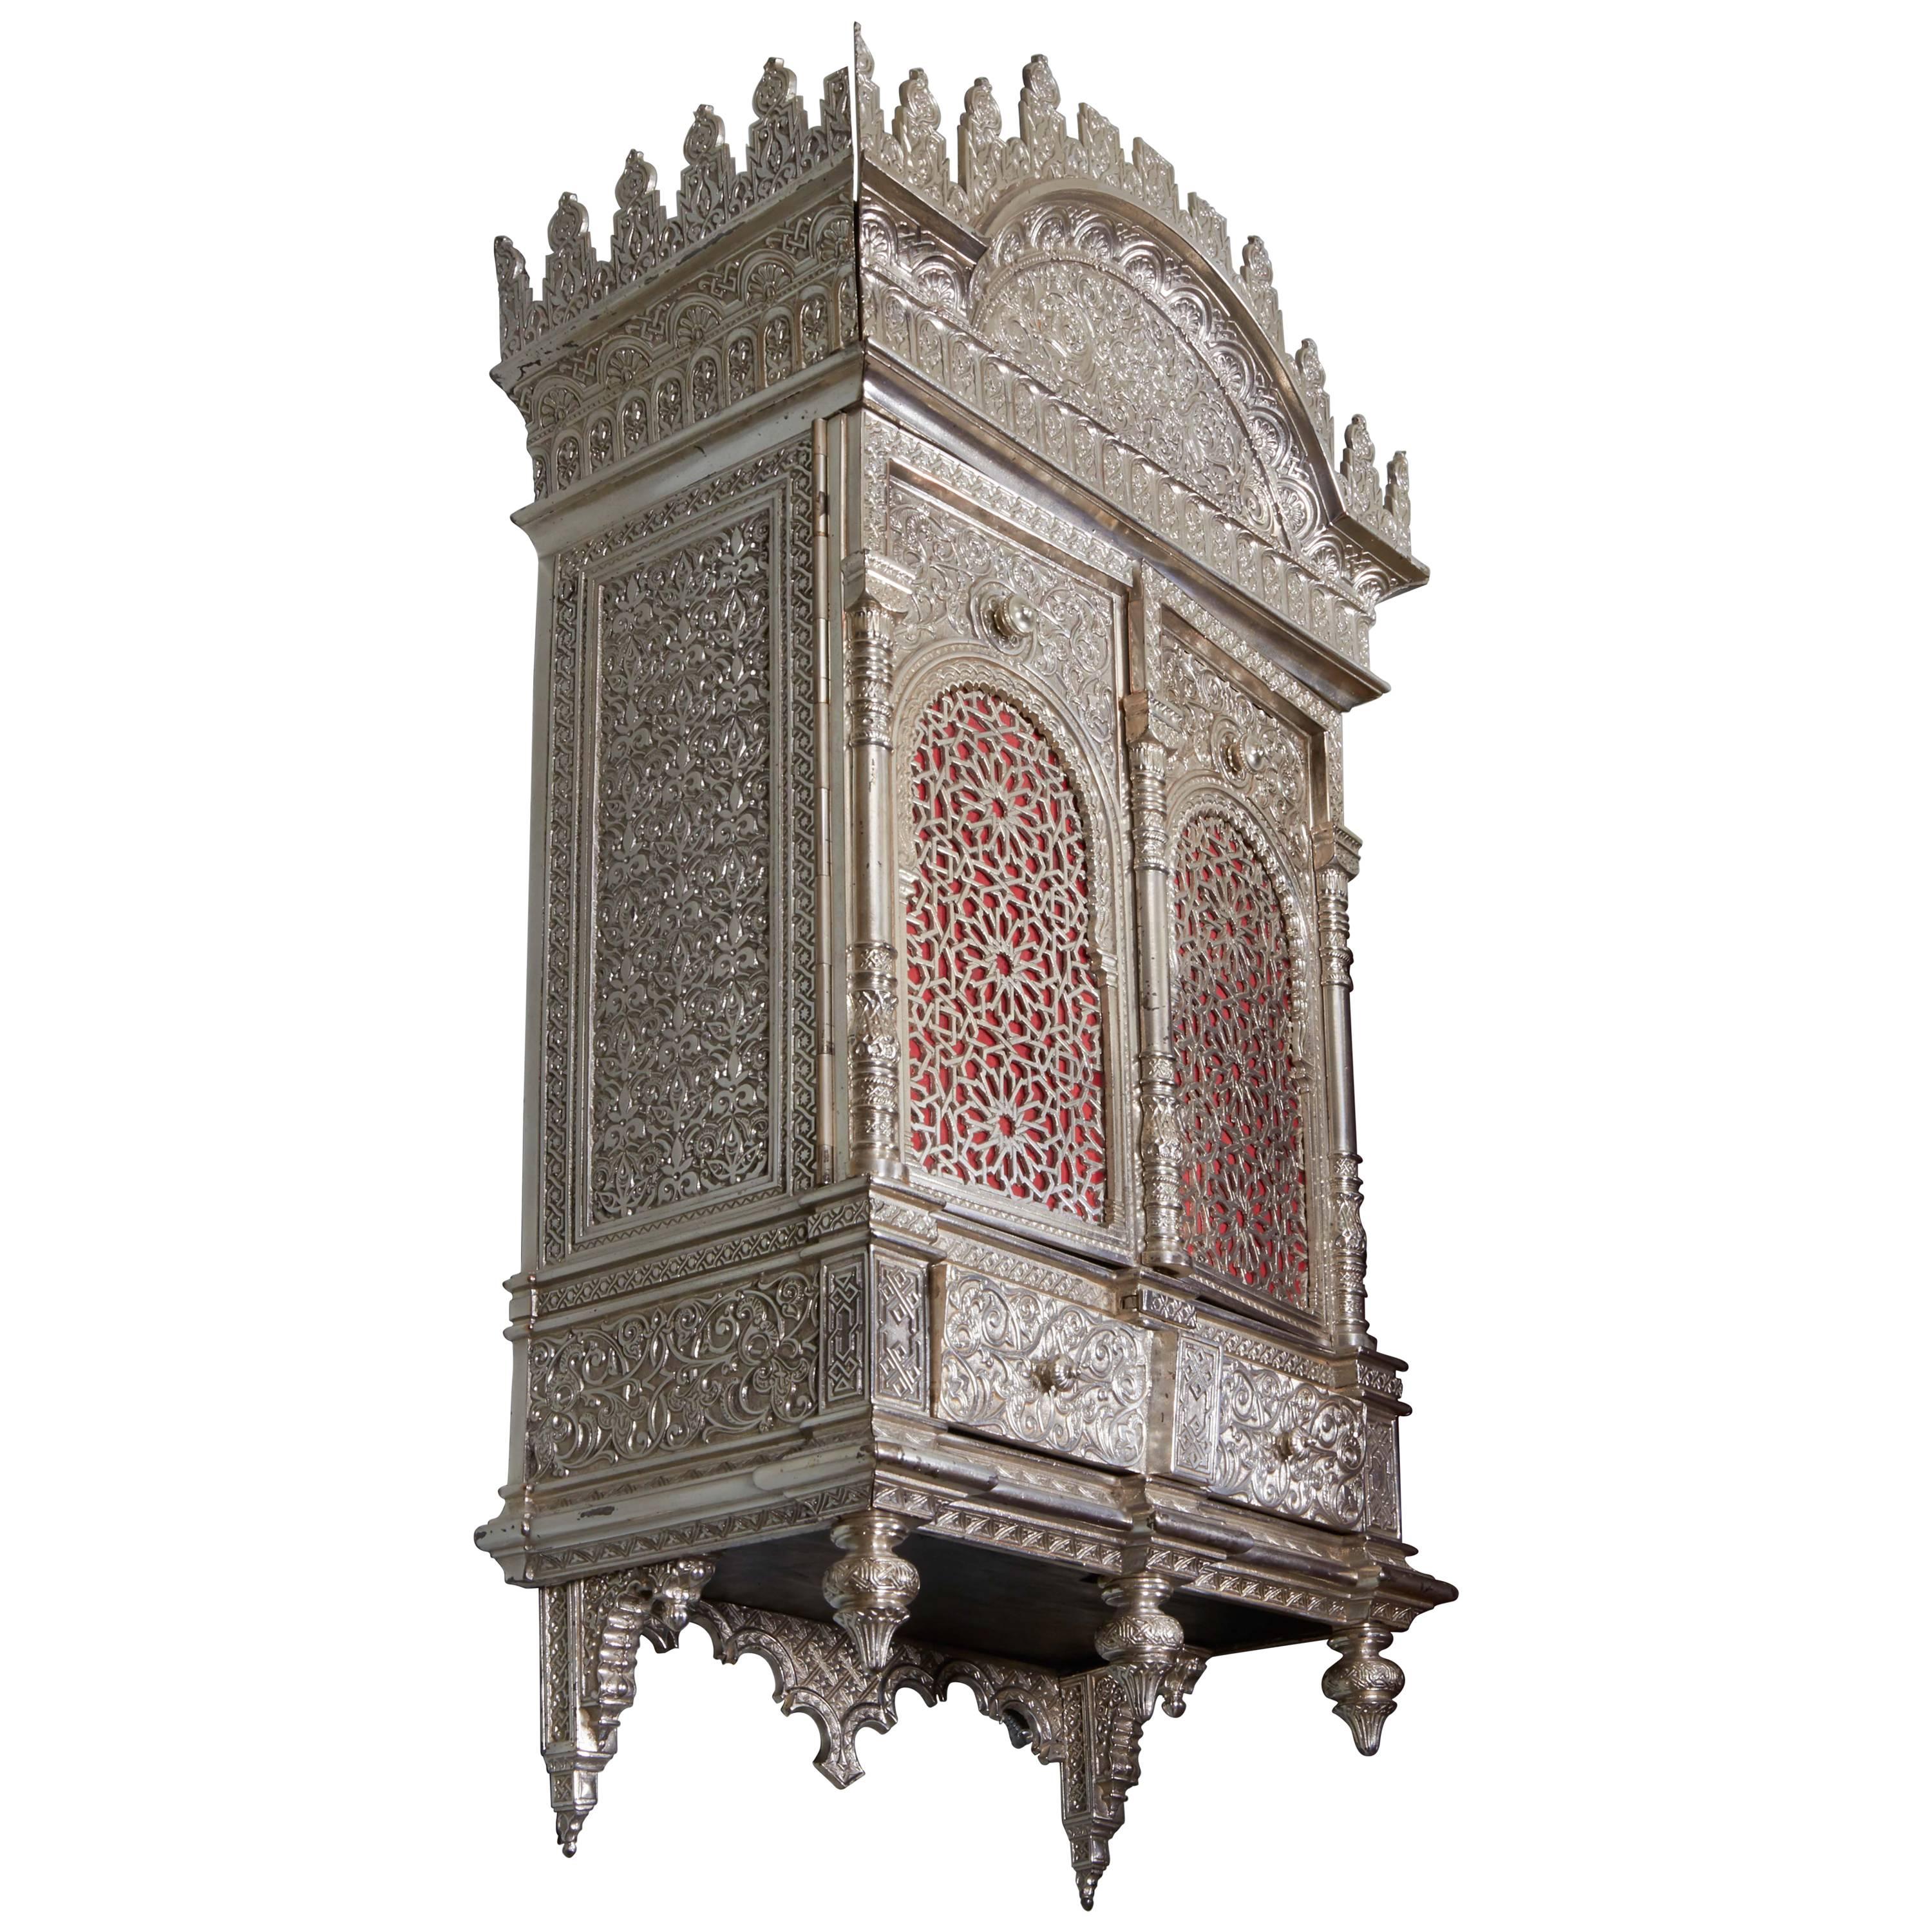 Alhambra Bronze Wall Cabinet / Torah Ark In the Islamic Nasrid Style - Signed